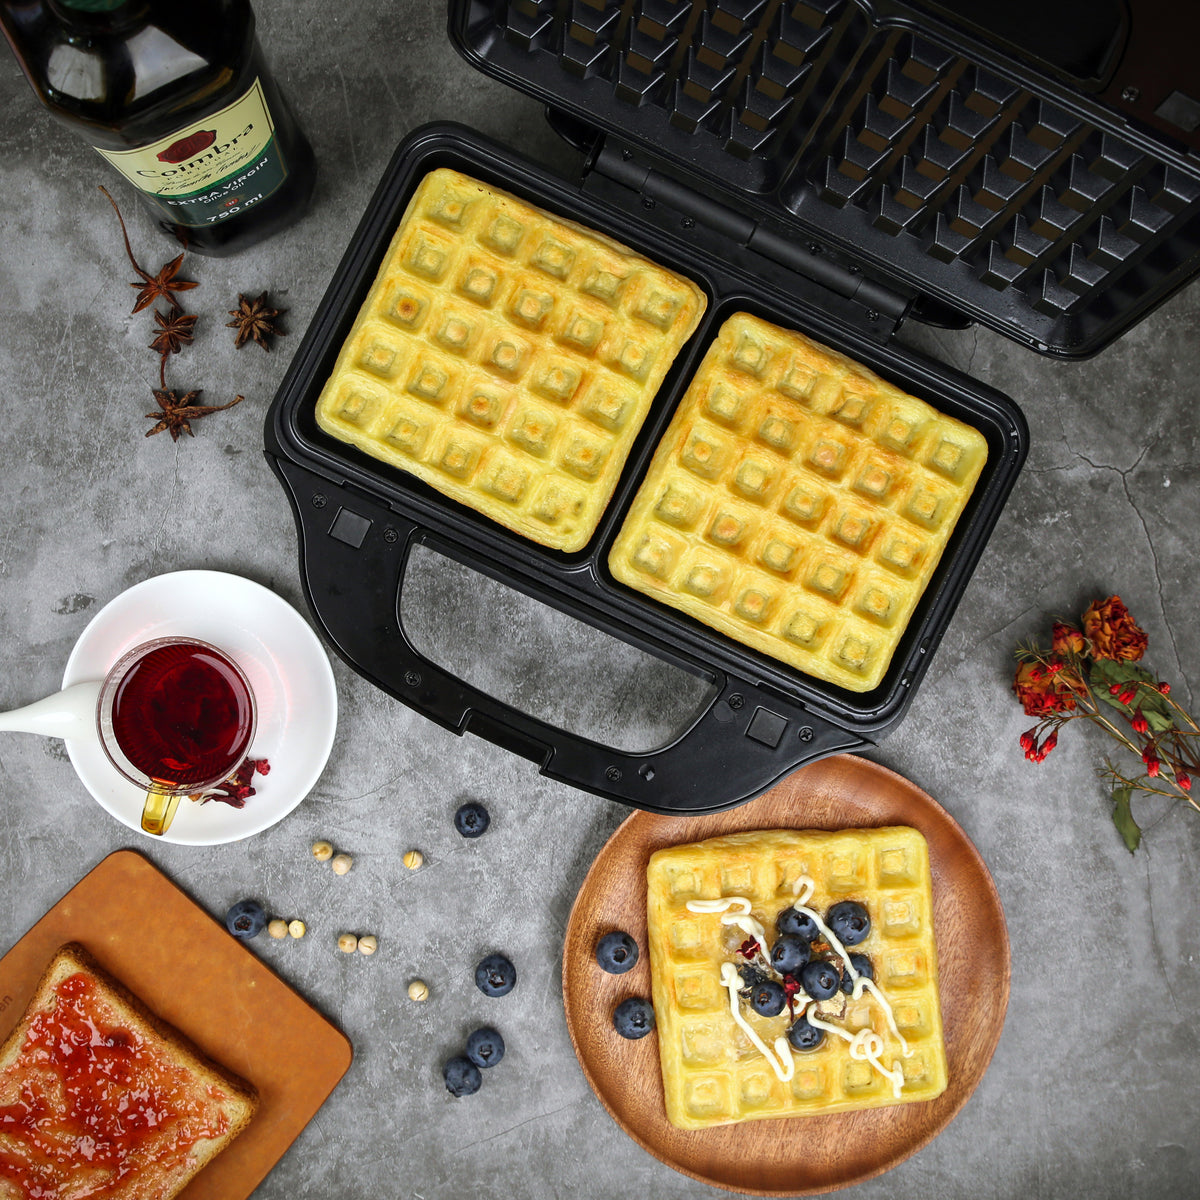 Top view of freshly made waffles in the sandwich press and on plates next to it - served with jam and fresh blueberries.